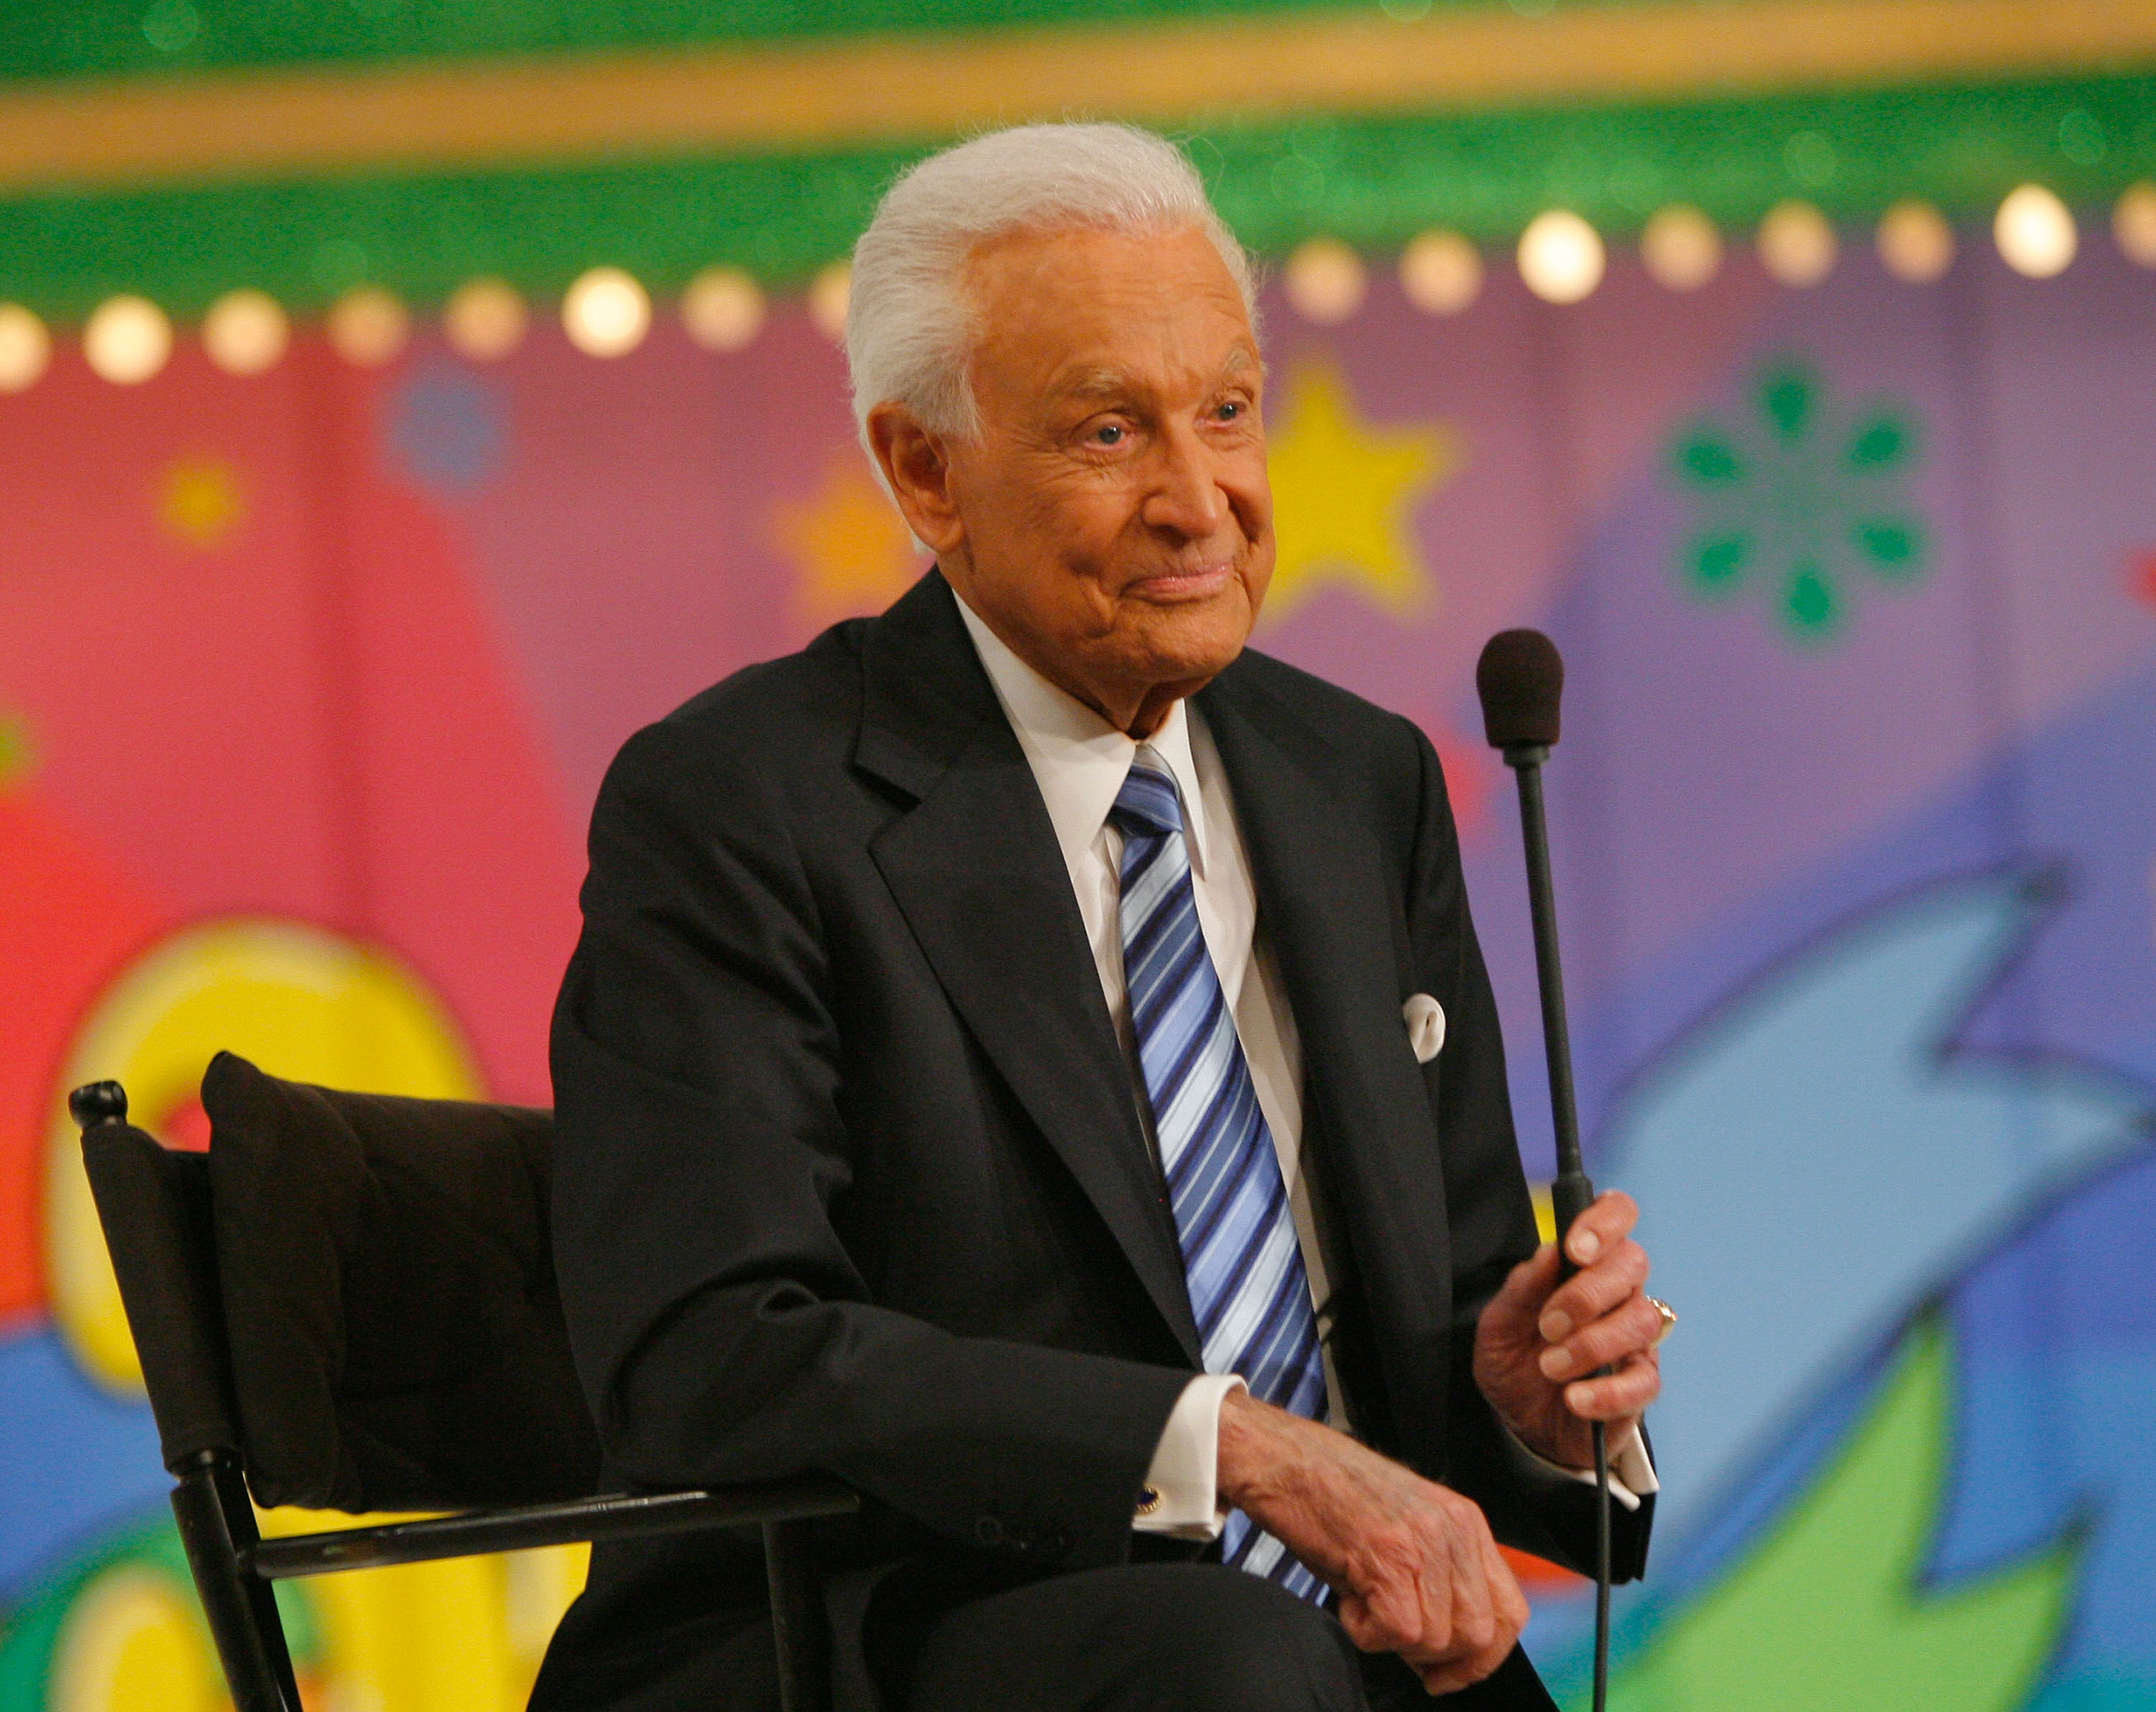 Bob Barker during the taping of his final episode of "The Price Is Right" in Los Angeles, 2007 | Source: Getty Images